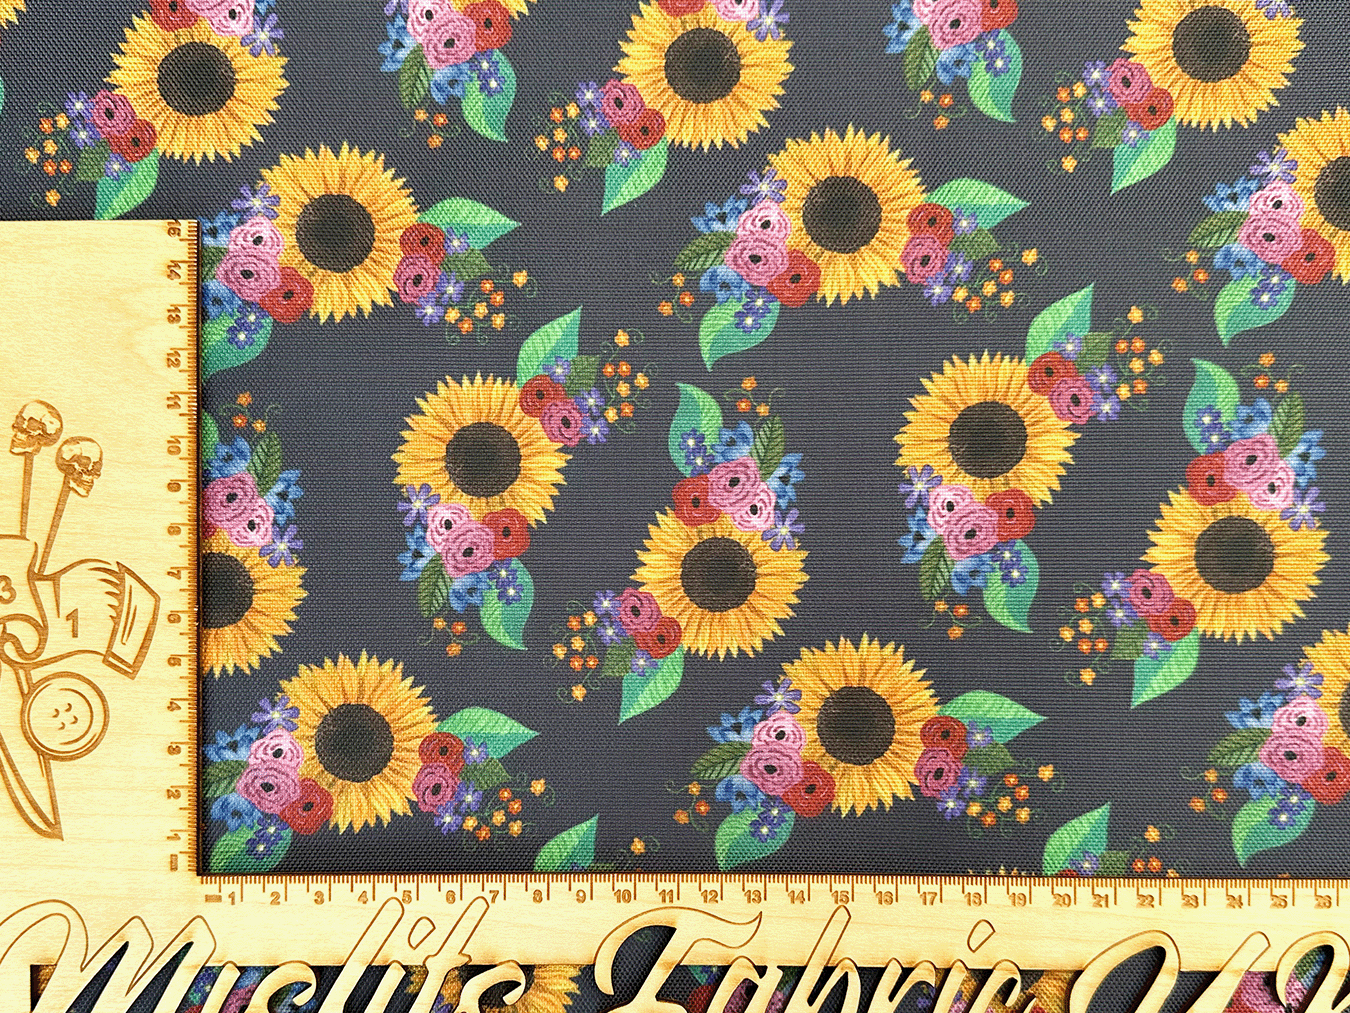 Sunflower, hand painted design, Waterproof Polyester Canvas.